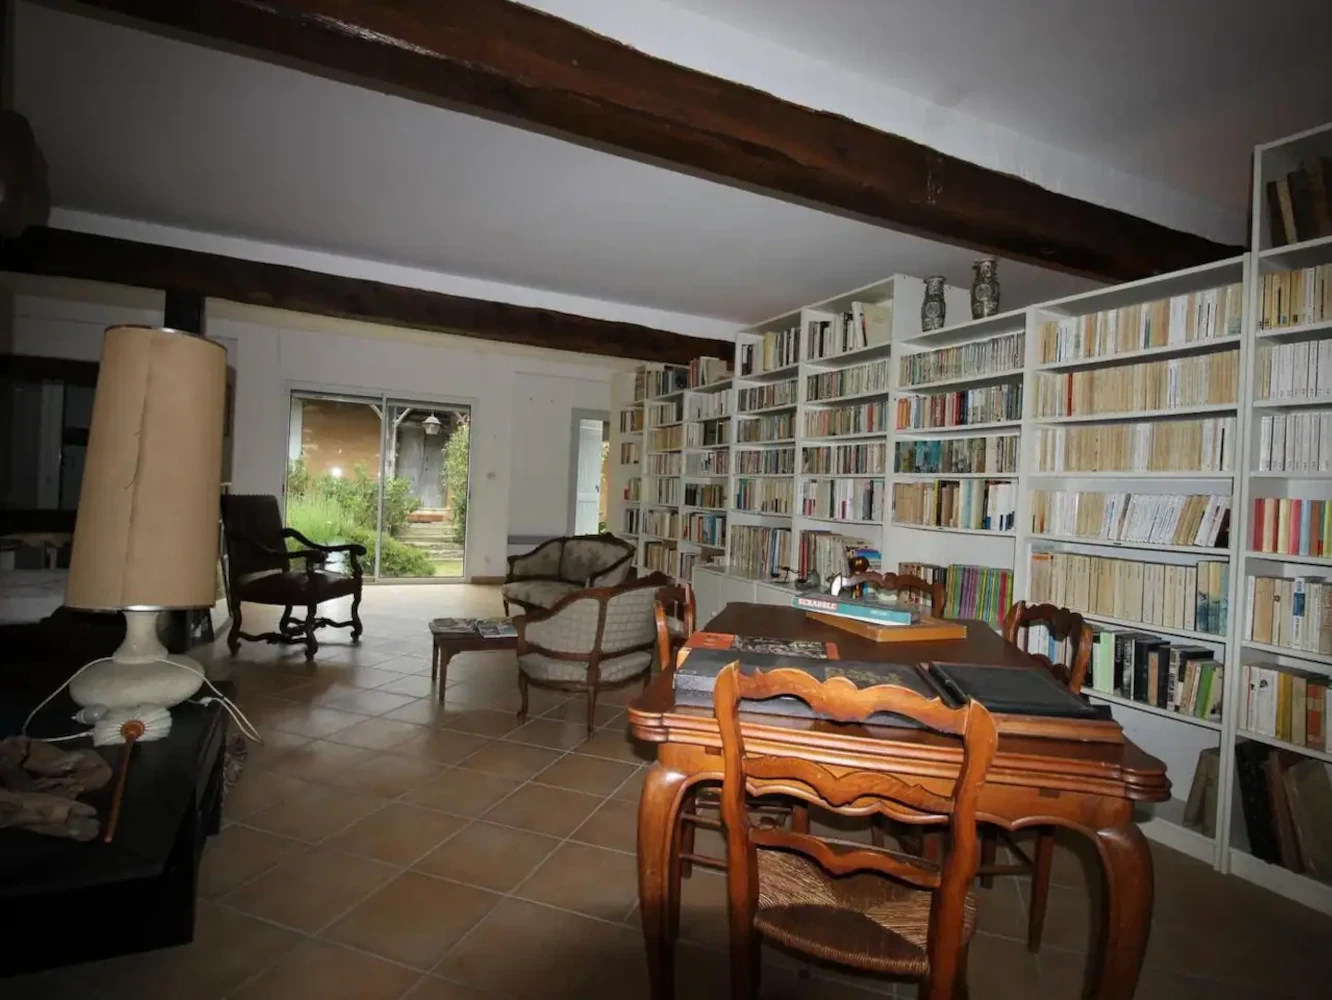 The library which is shared with the owners (who have a different door)